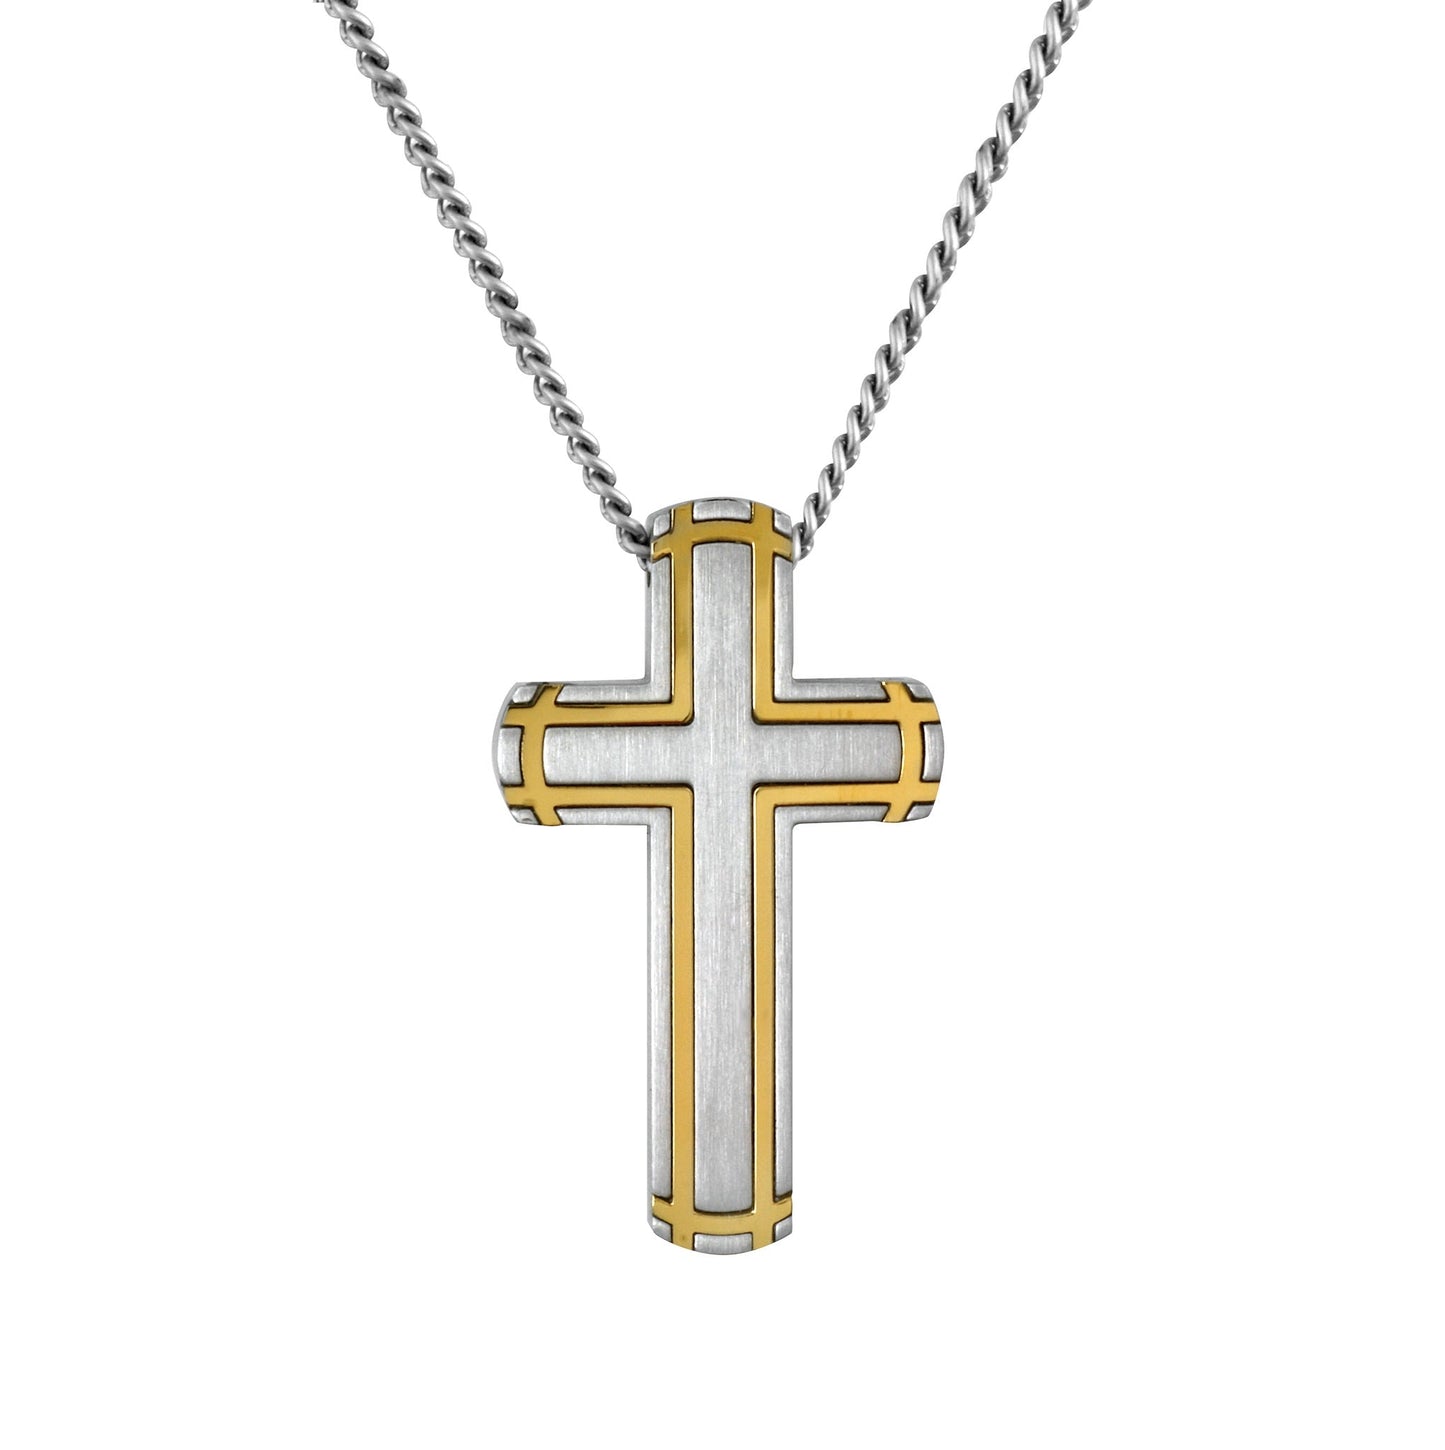 A stainless steel cross with gold bands on 24" chain displayed on a neutral white background.